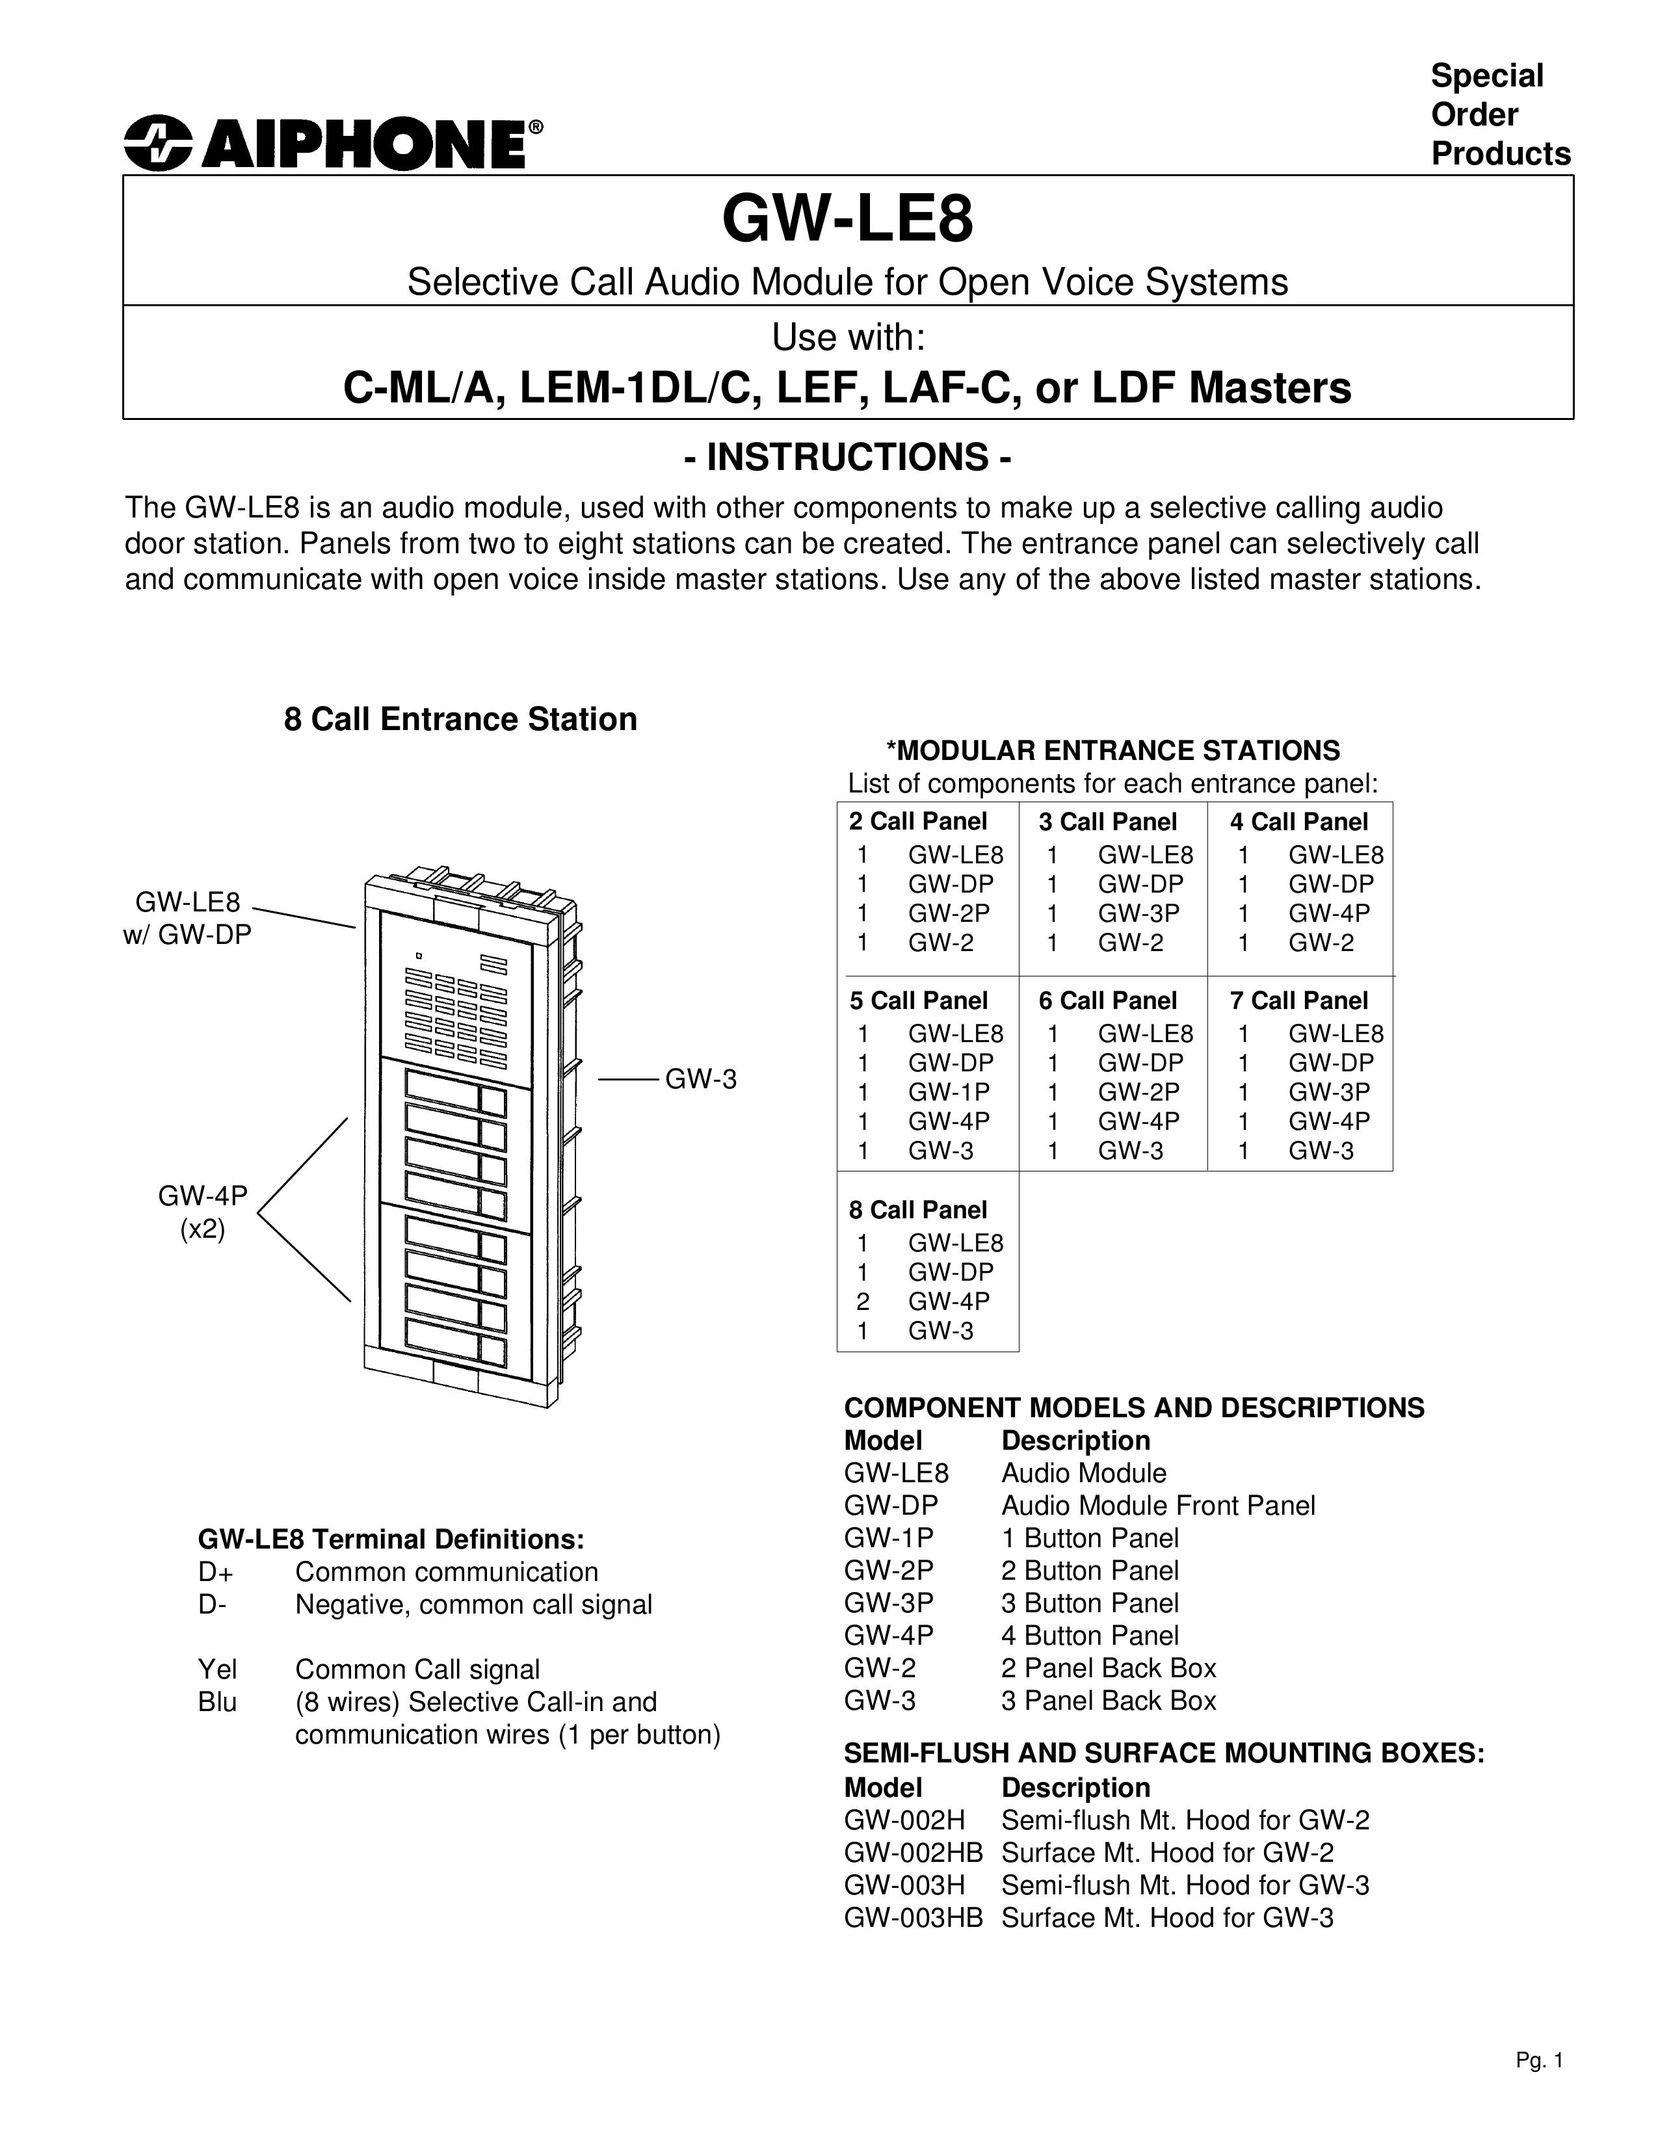 Aiphone GW-LE8 Baby Monitor User Manual